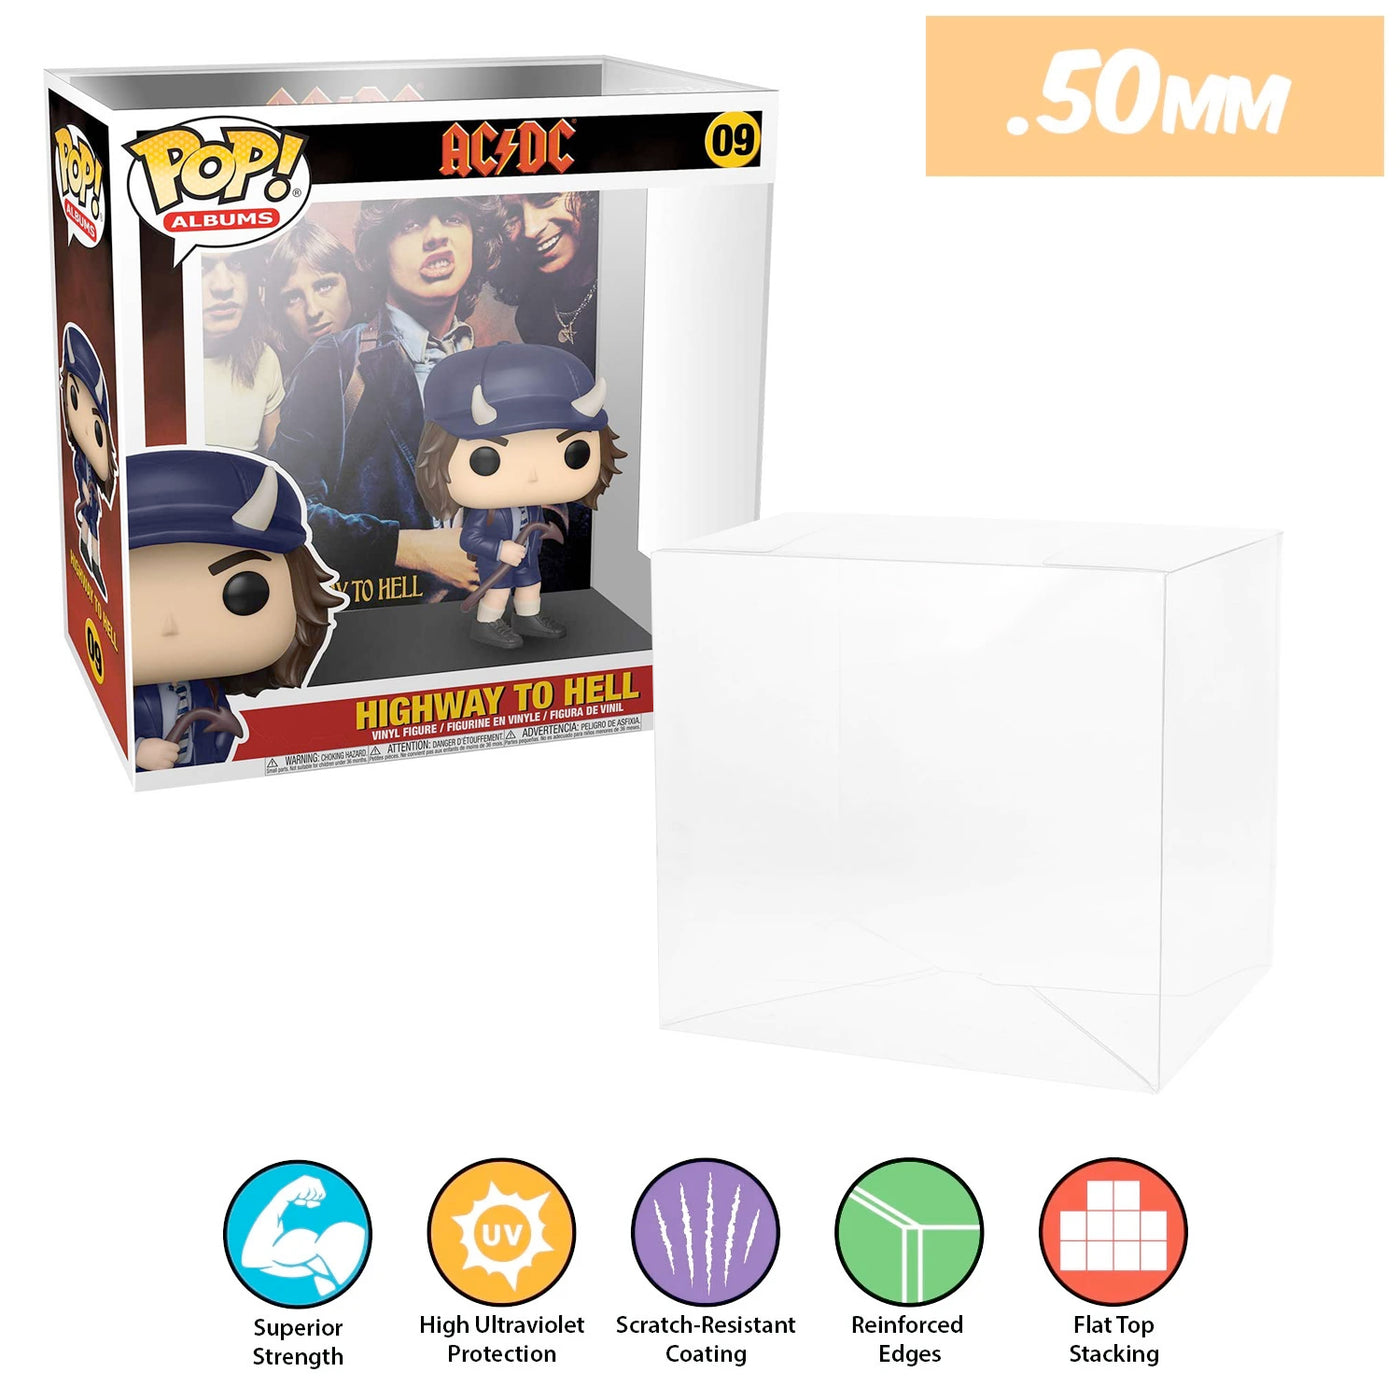 09 acdc highway to hell pop albums best funko pop protectors thick strong uv scratch flat top stack vinyl display geek plastic shield vaulted eco armor fits collect protect display case kollector protector